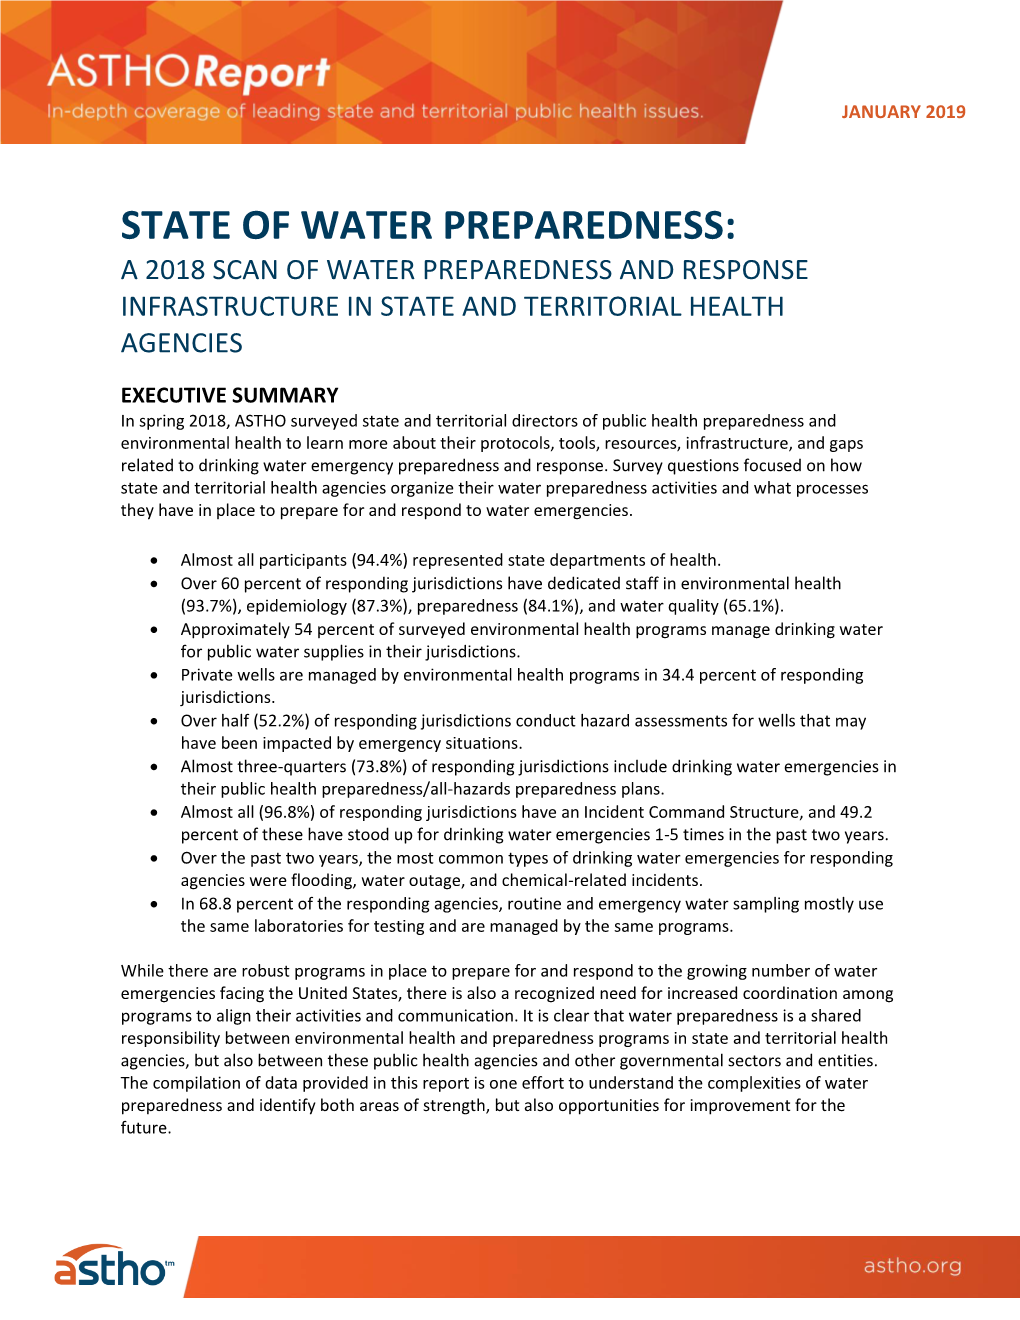 State of Water Preparedness: a 2018 Scan of Water Preparedness and Response Infrastructure in State and Territorial Health Agencies